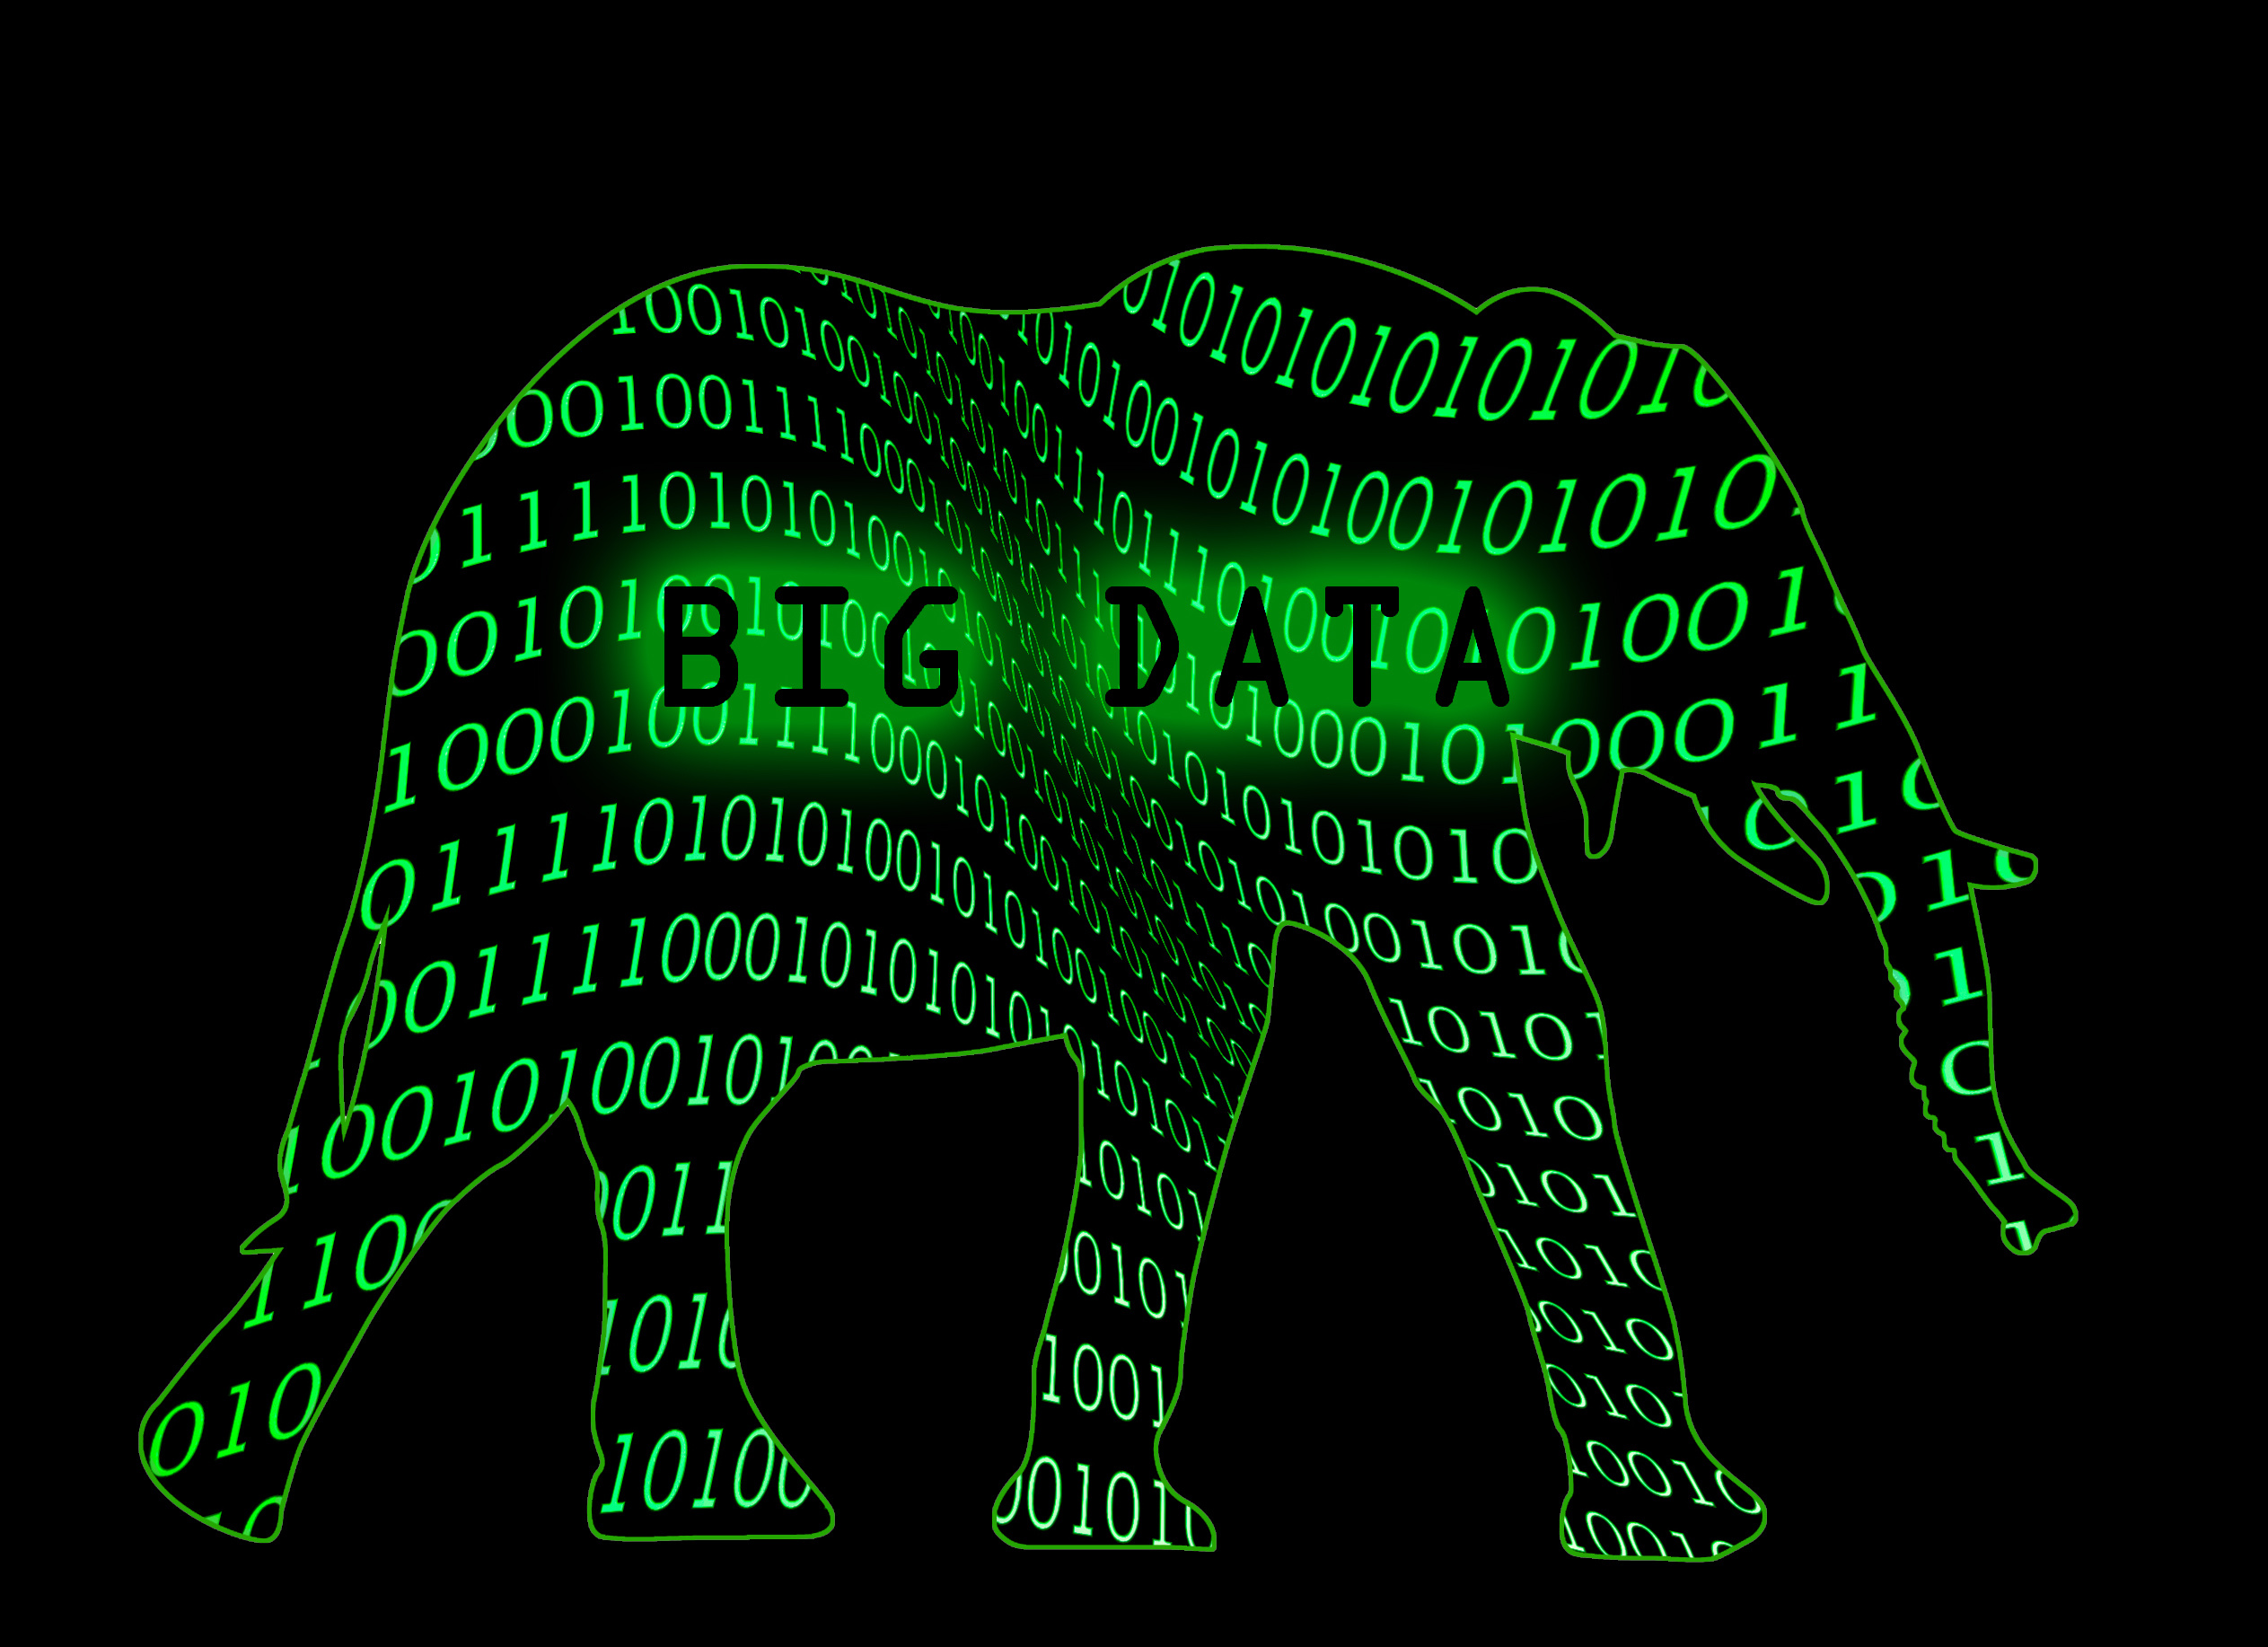 How to manage big data in the age of digital